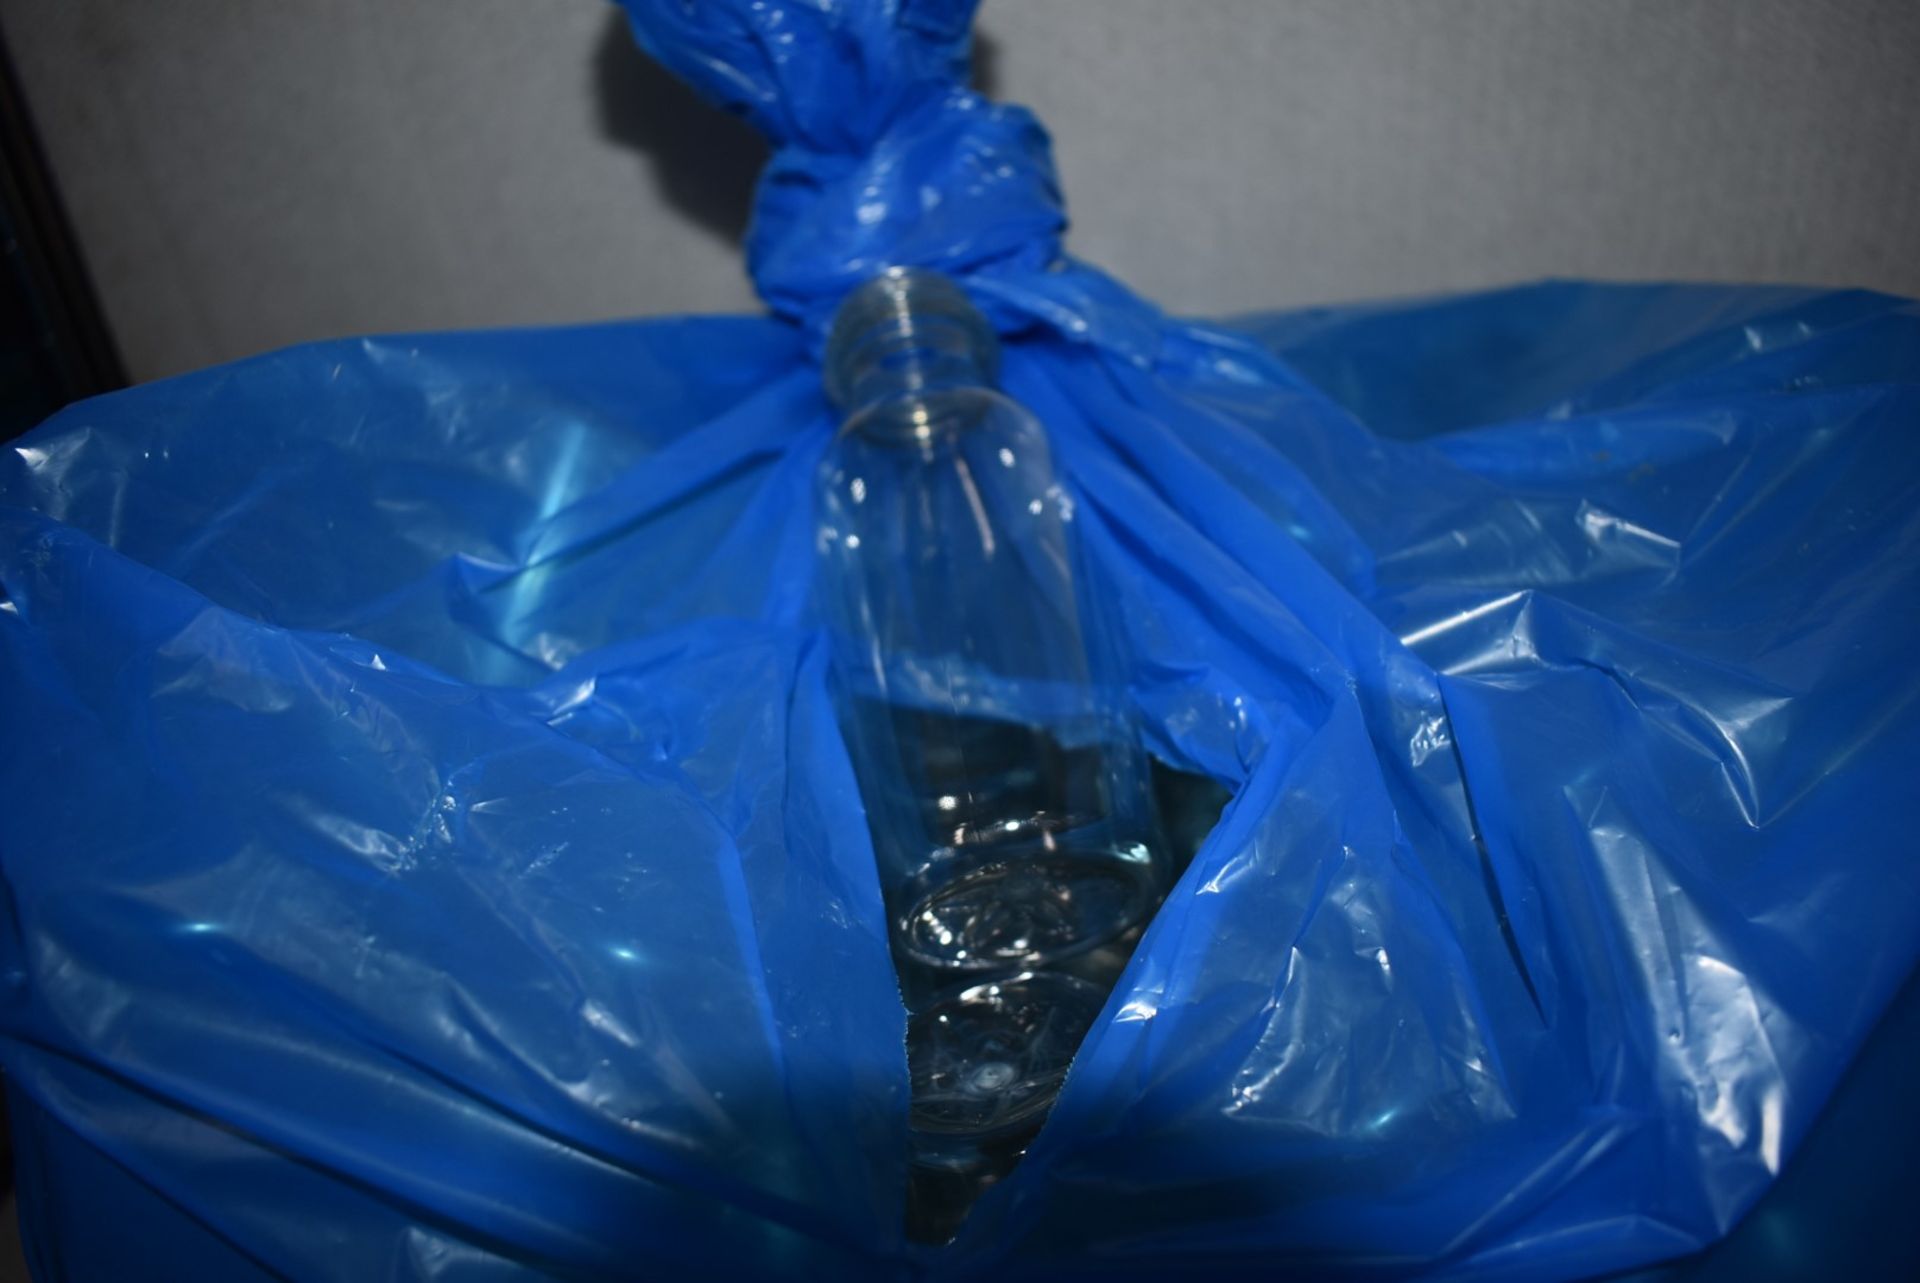 1 x Large Bag of Unused Plastic Bottles - Recently Removed From a Vegan Deli - CL999 - Ref: SL190 - Image 2 of 6